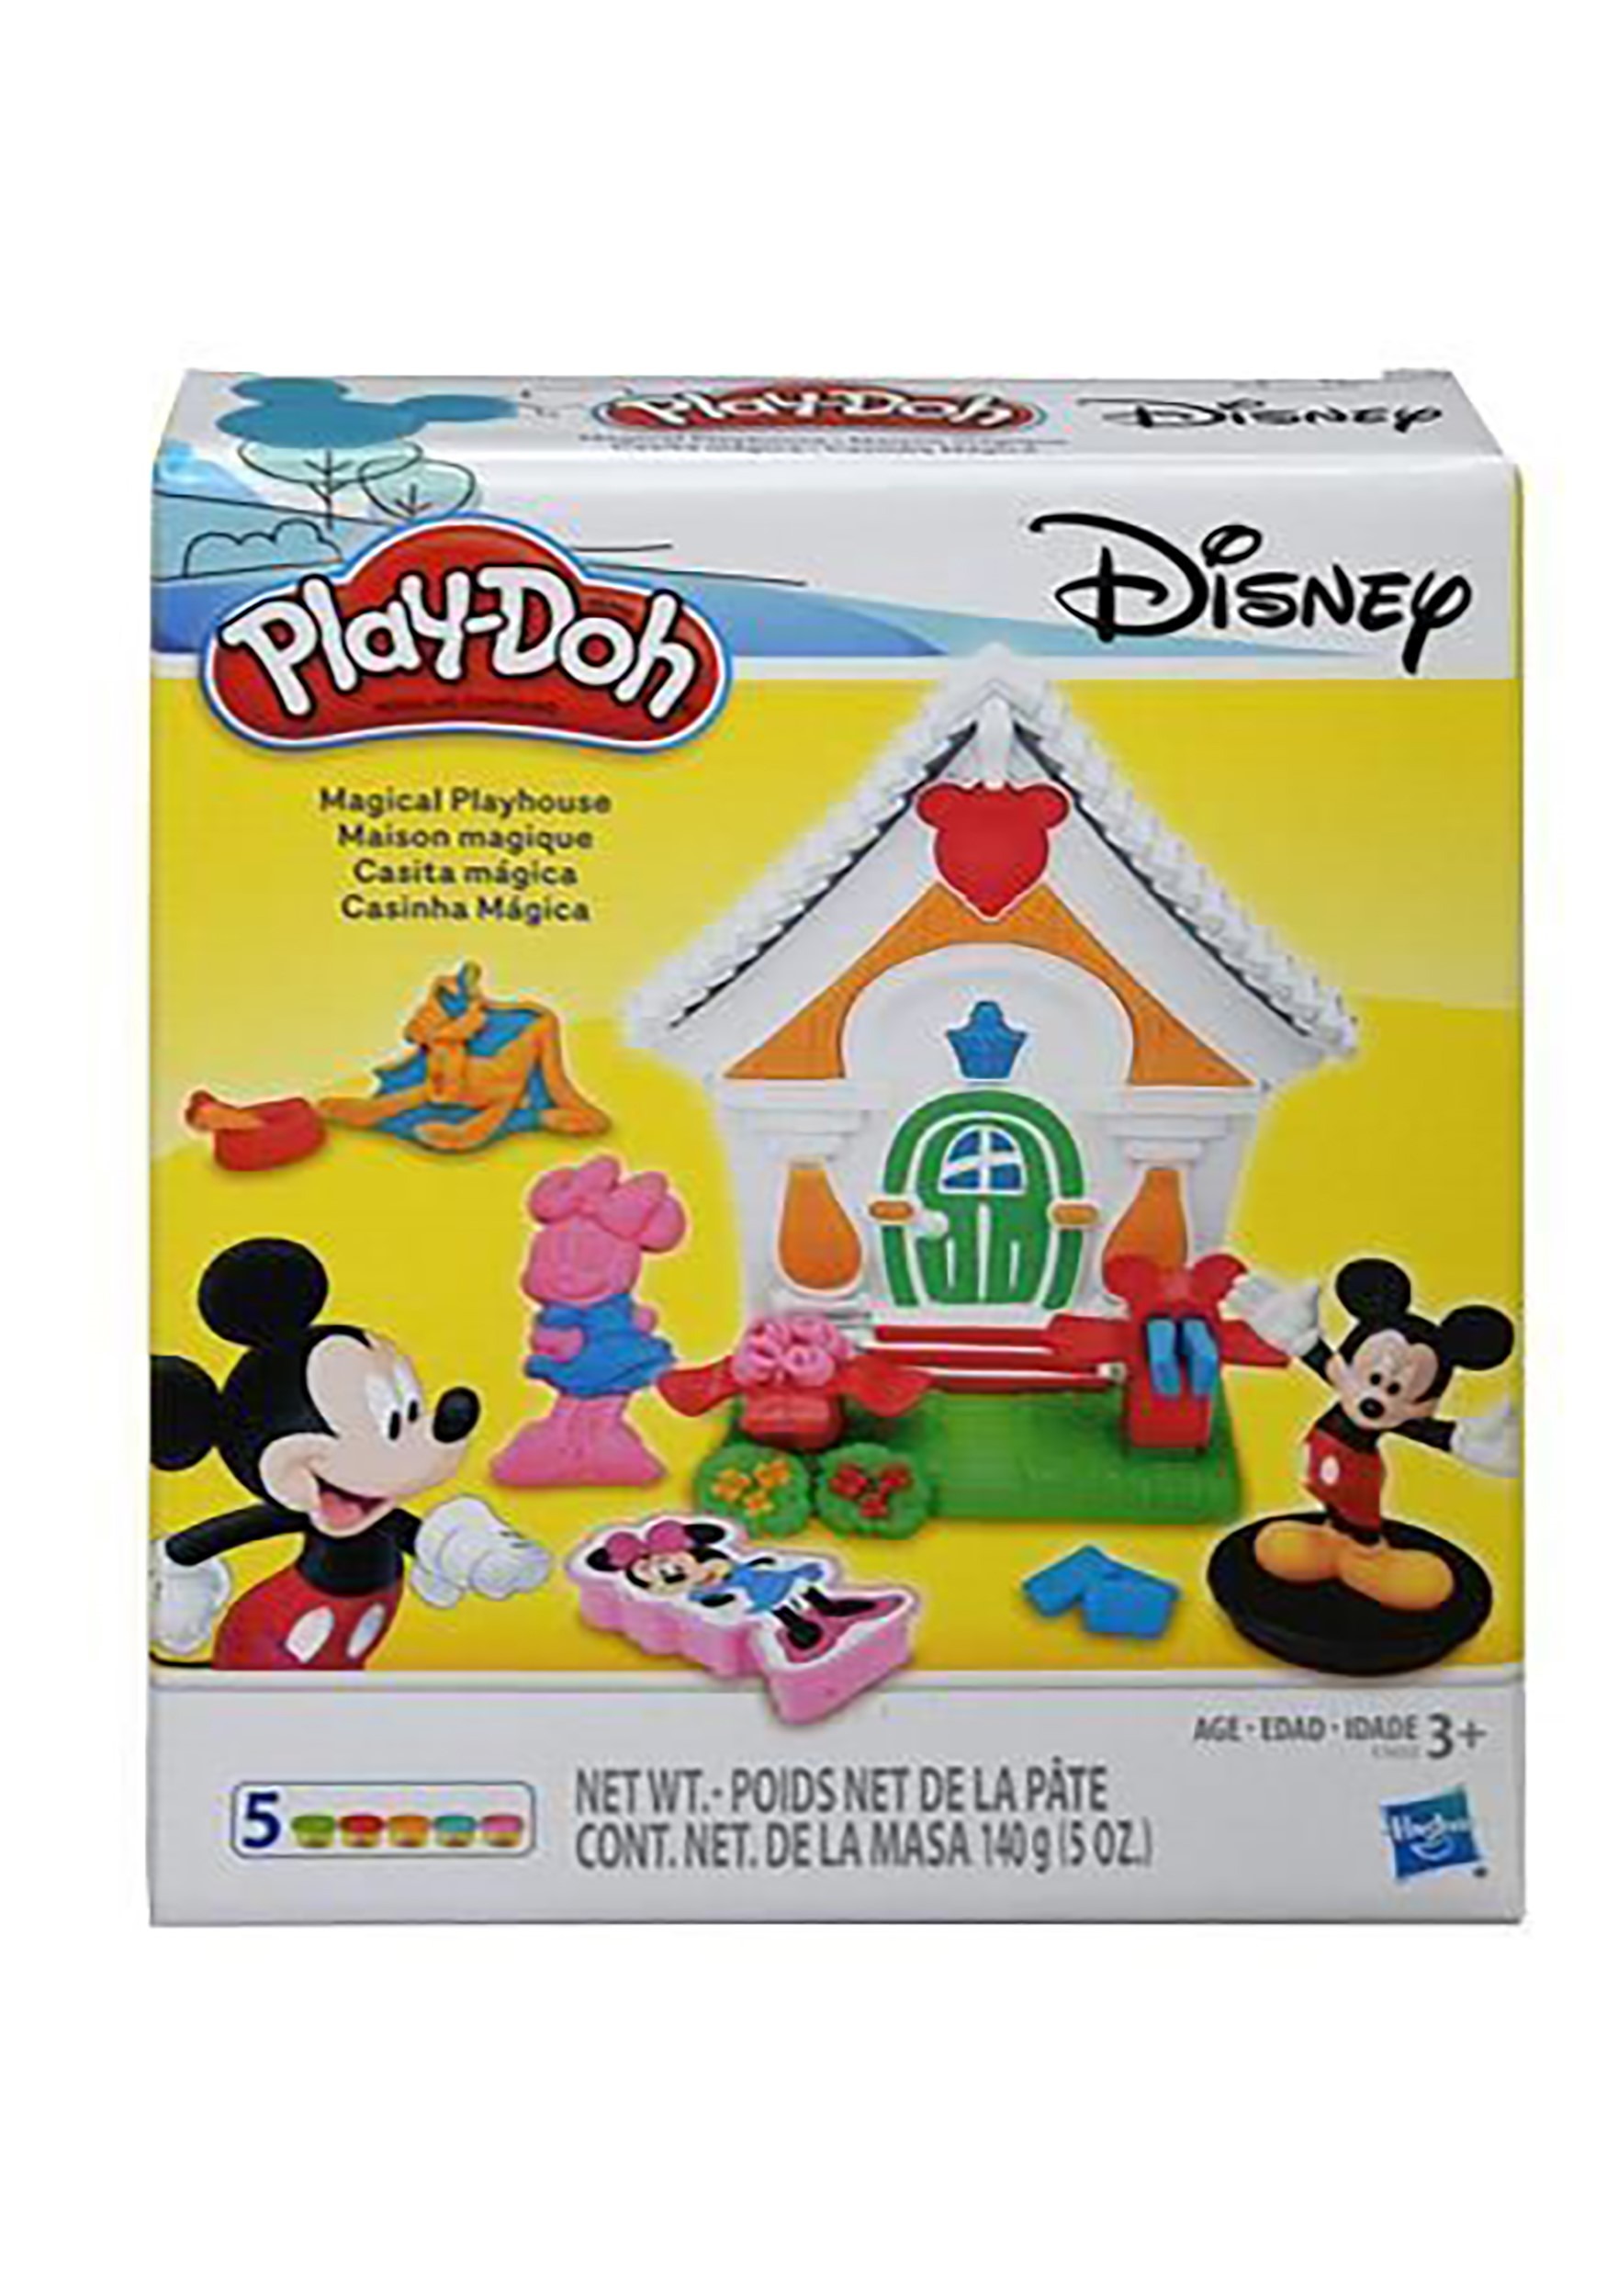 Mickey Mouse Magical Play Doh Playhouse